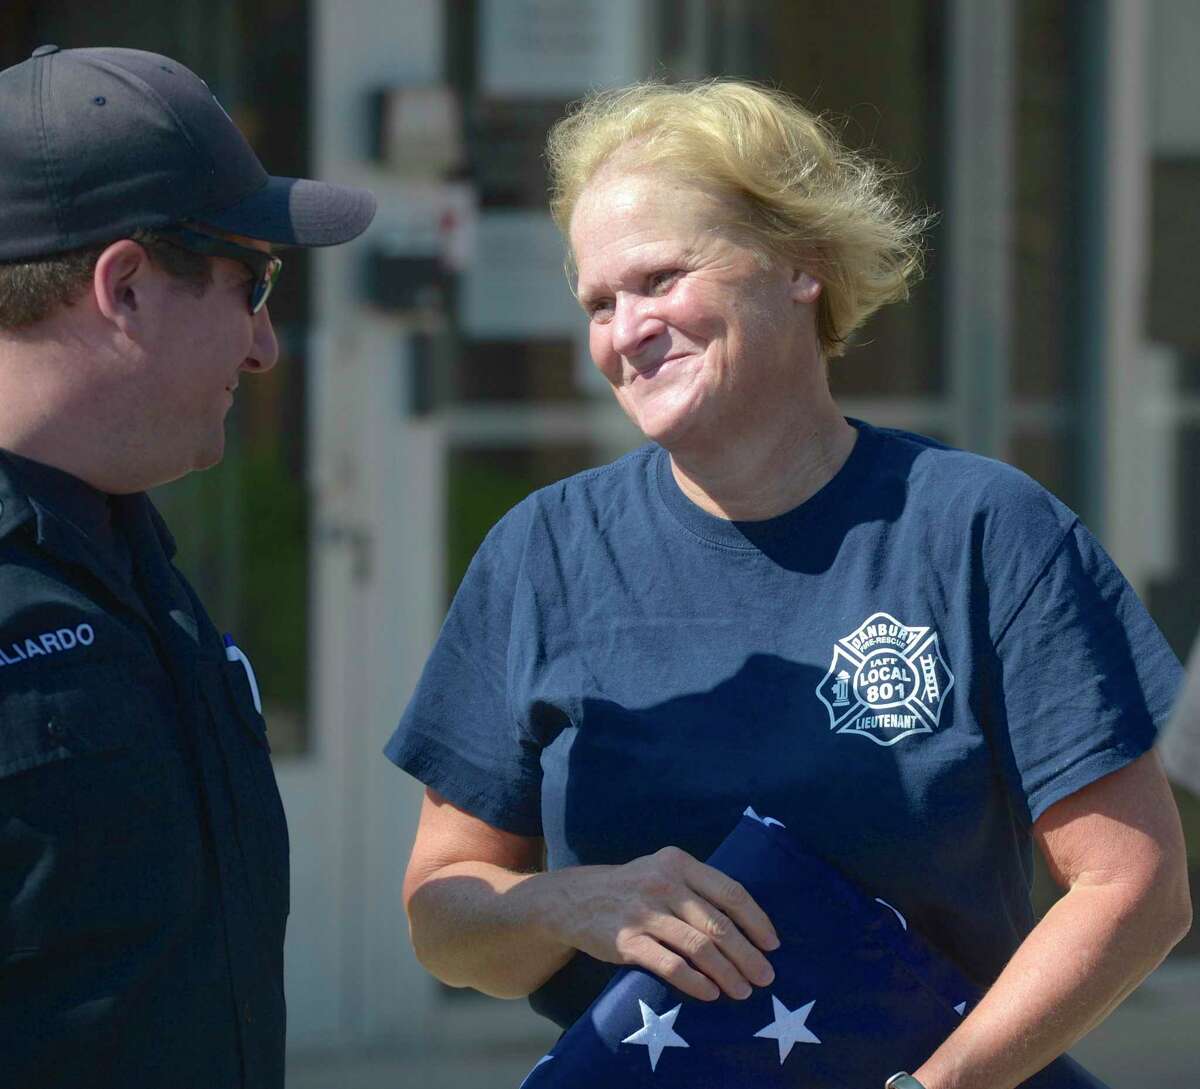 Lieutenant Lorinda Arconti, right, talks with department Communication Coordinator after a flag ceremony to mark her retirement after 32 years with the Danbury Fire Department on Thursday. Arconti was the first female firefighter and the first female Lieutenant.